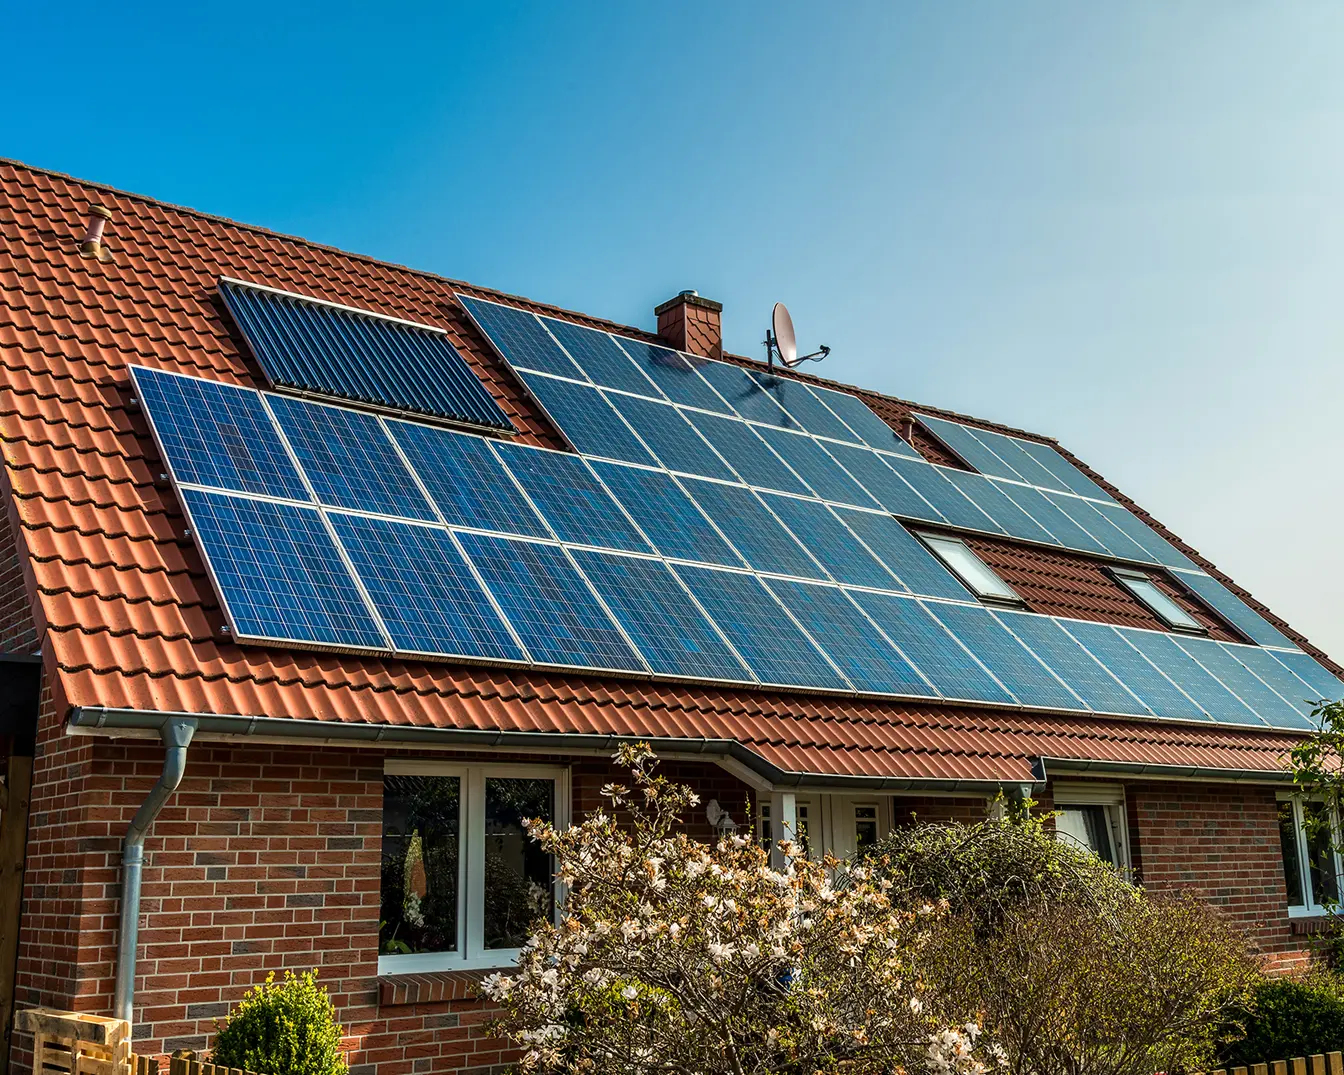 Residential house with solar panels on roof